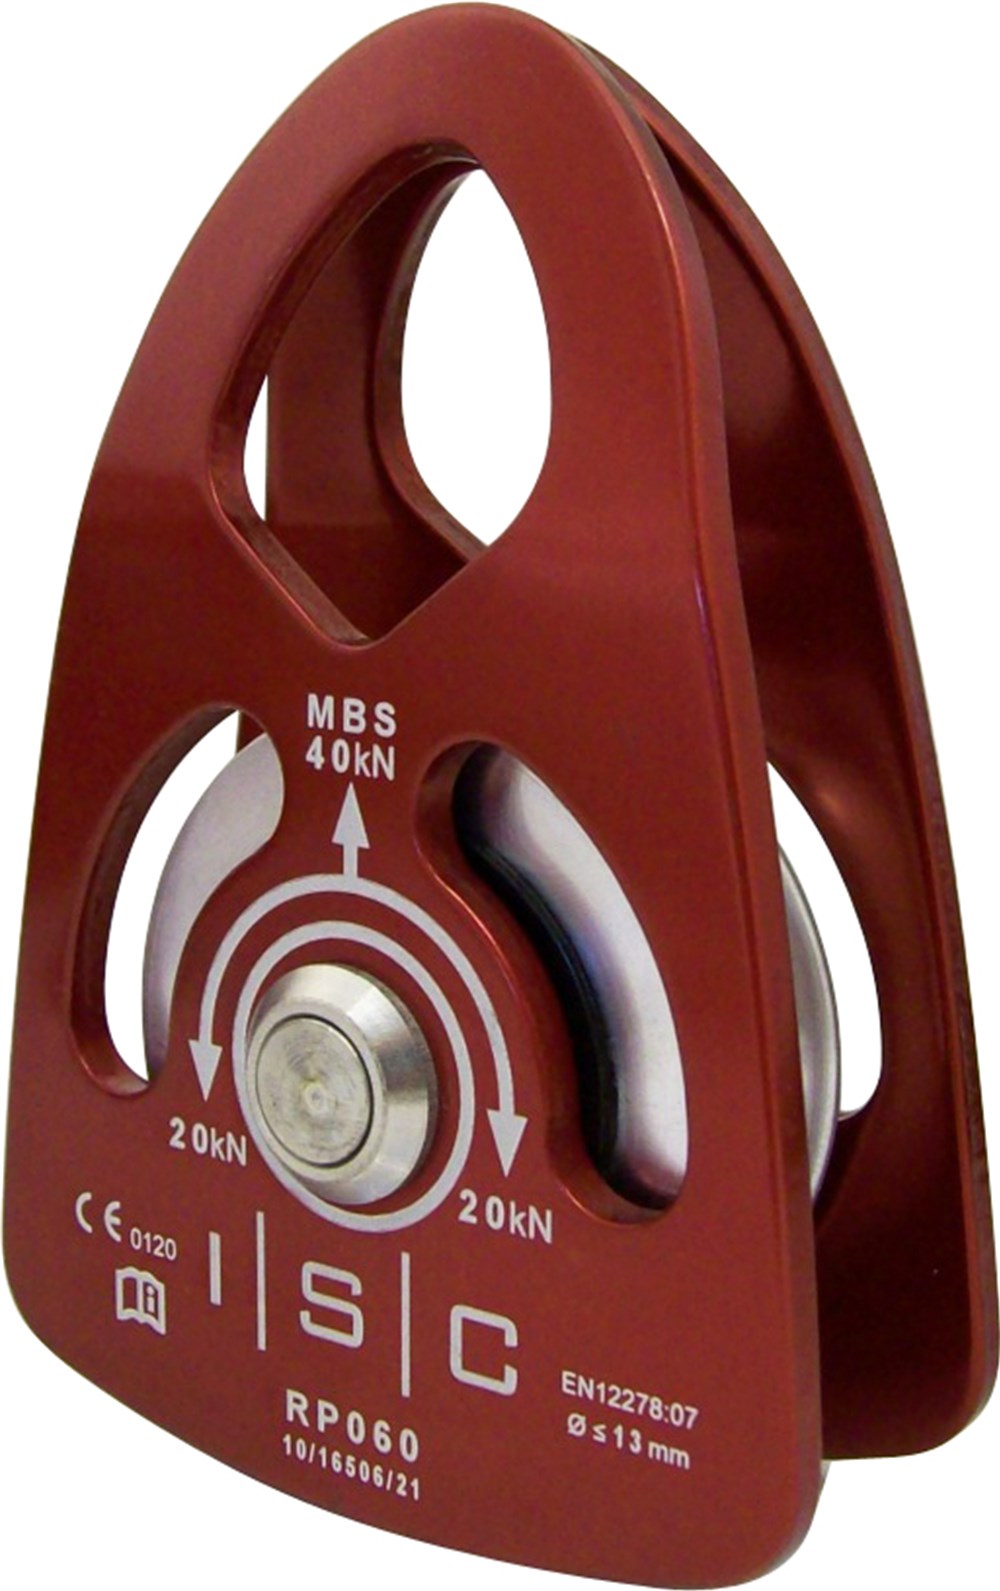 ISC Prusik Minding Pulley Small Single/Single